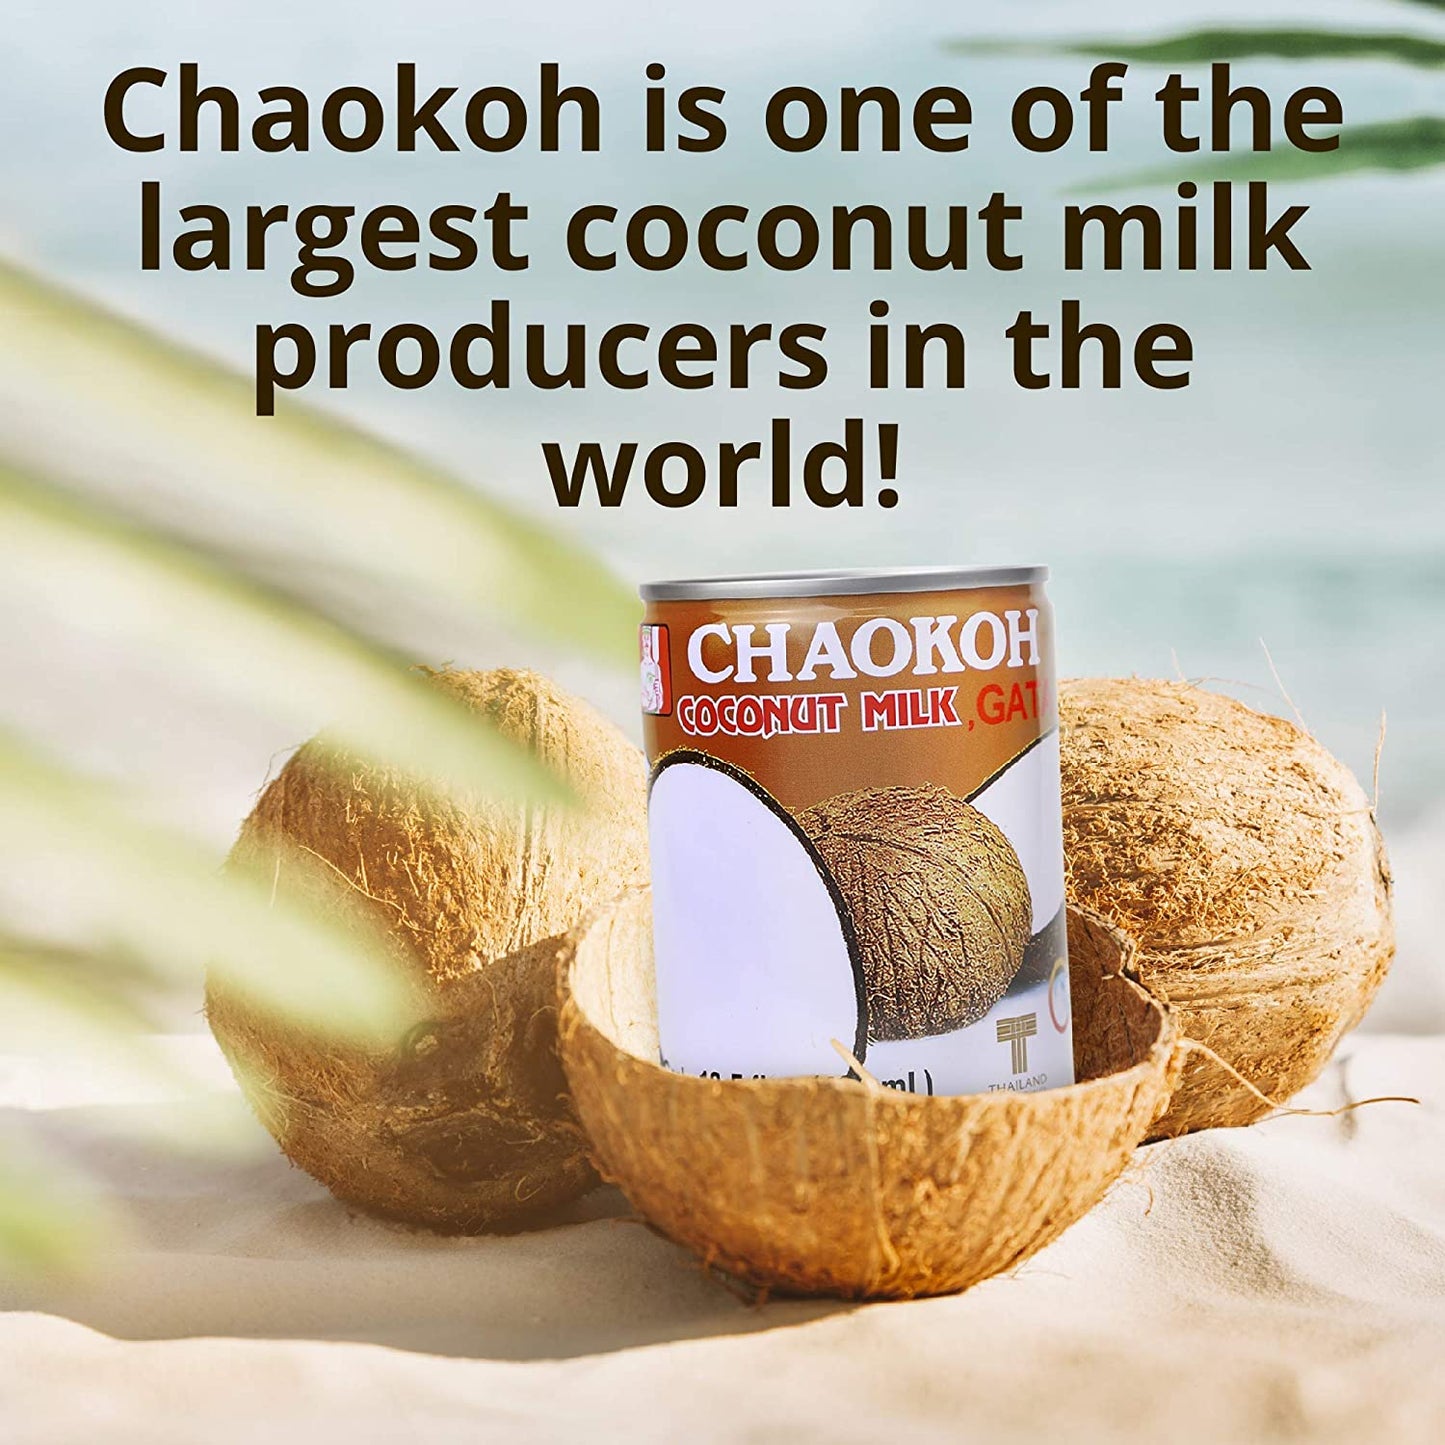 Chaokoh Coconut Milk Unsweetened 6 Pack - Premium, Canned Coconut Milk, Lactose Free, Non Dairy Vegan Milk - for Curries, Drinks, Desserts, & More (13.5 oz per Can)